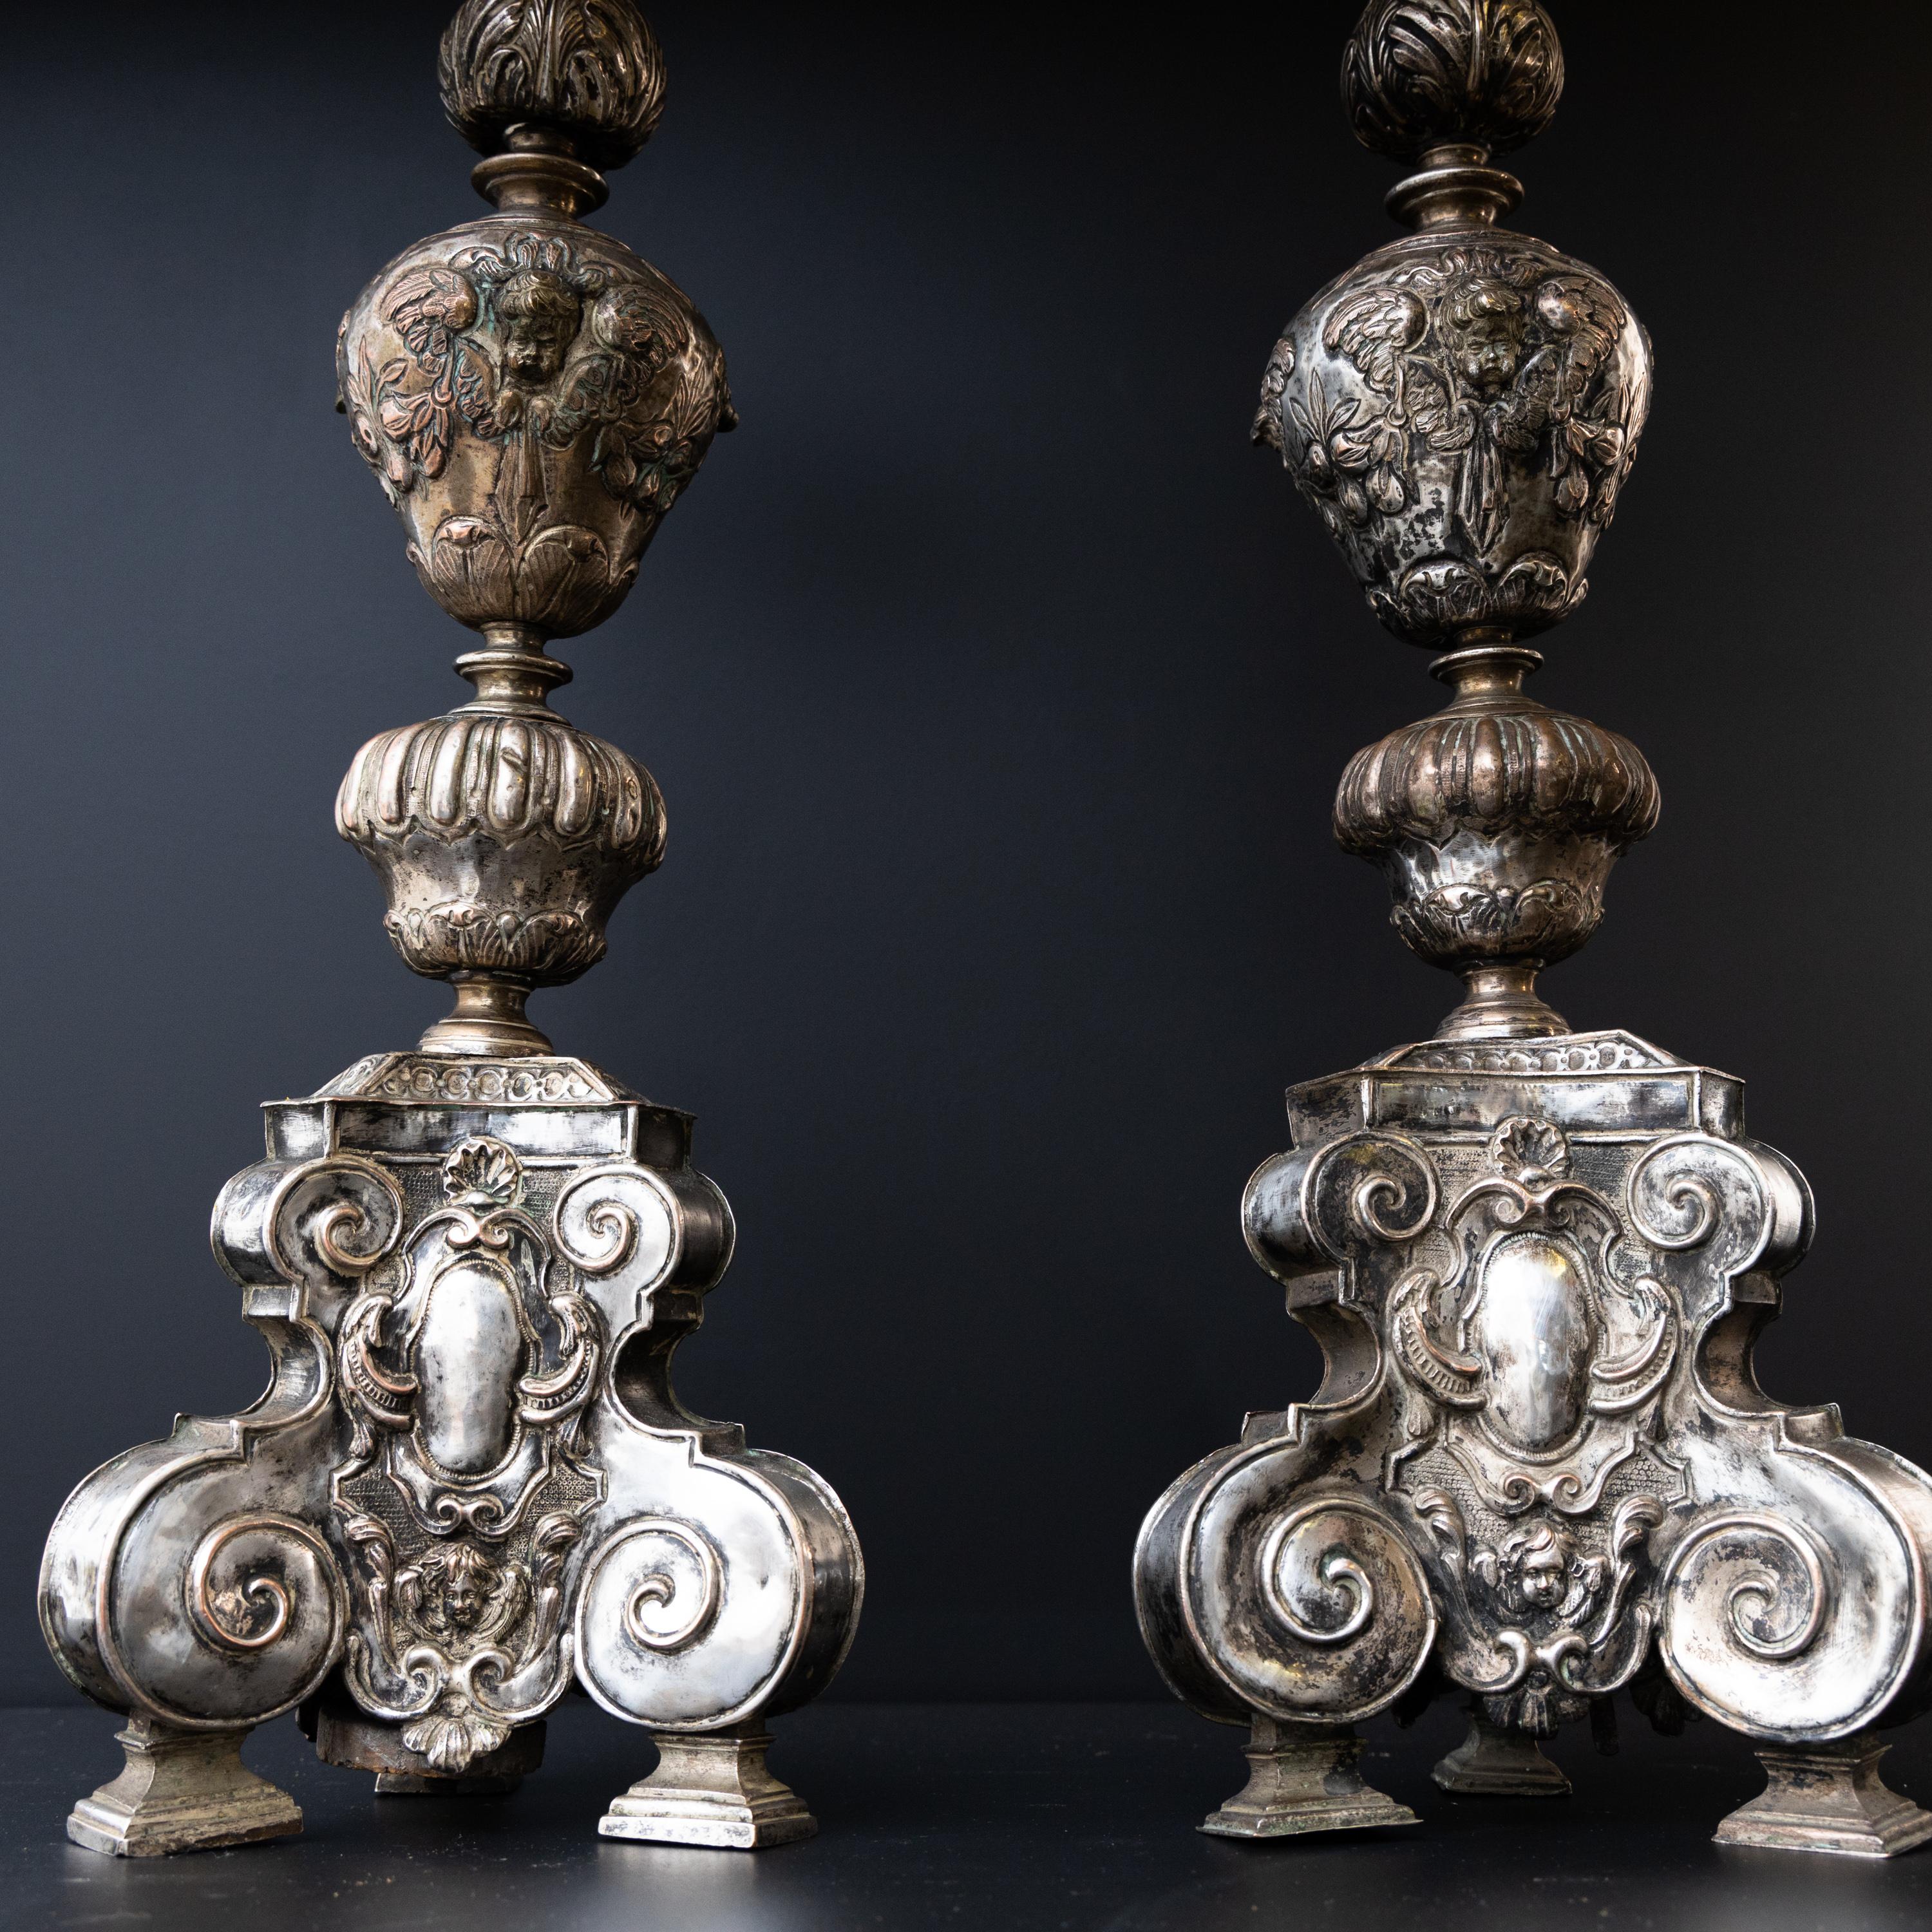 Renaissance Pair of Silver-Plated Altar Candlesticks, Italy, 17th Century